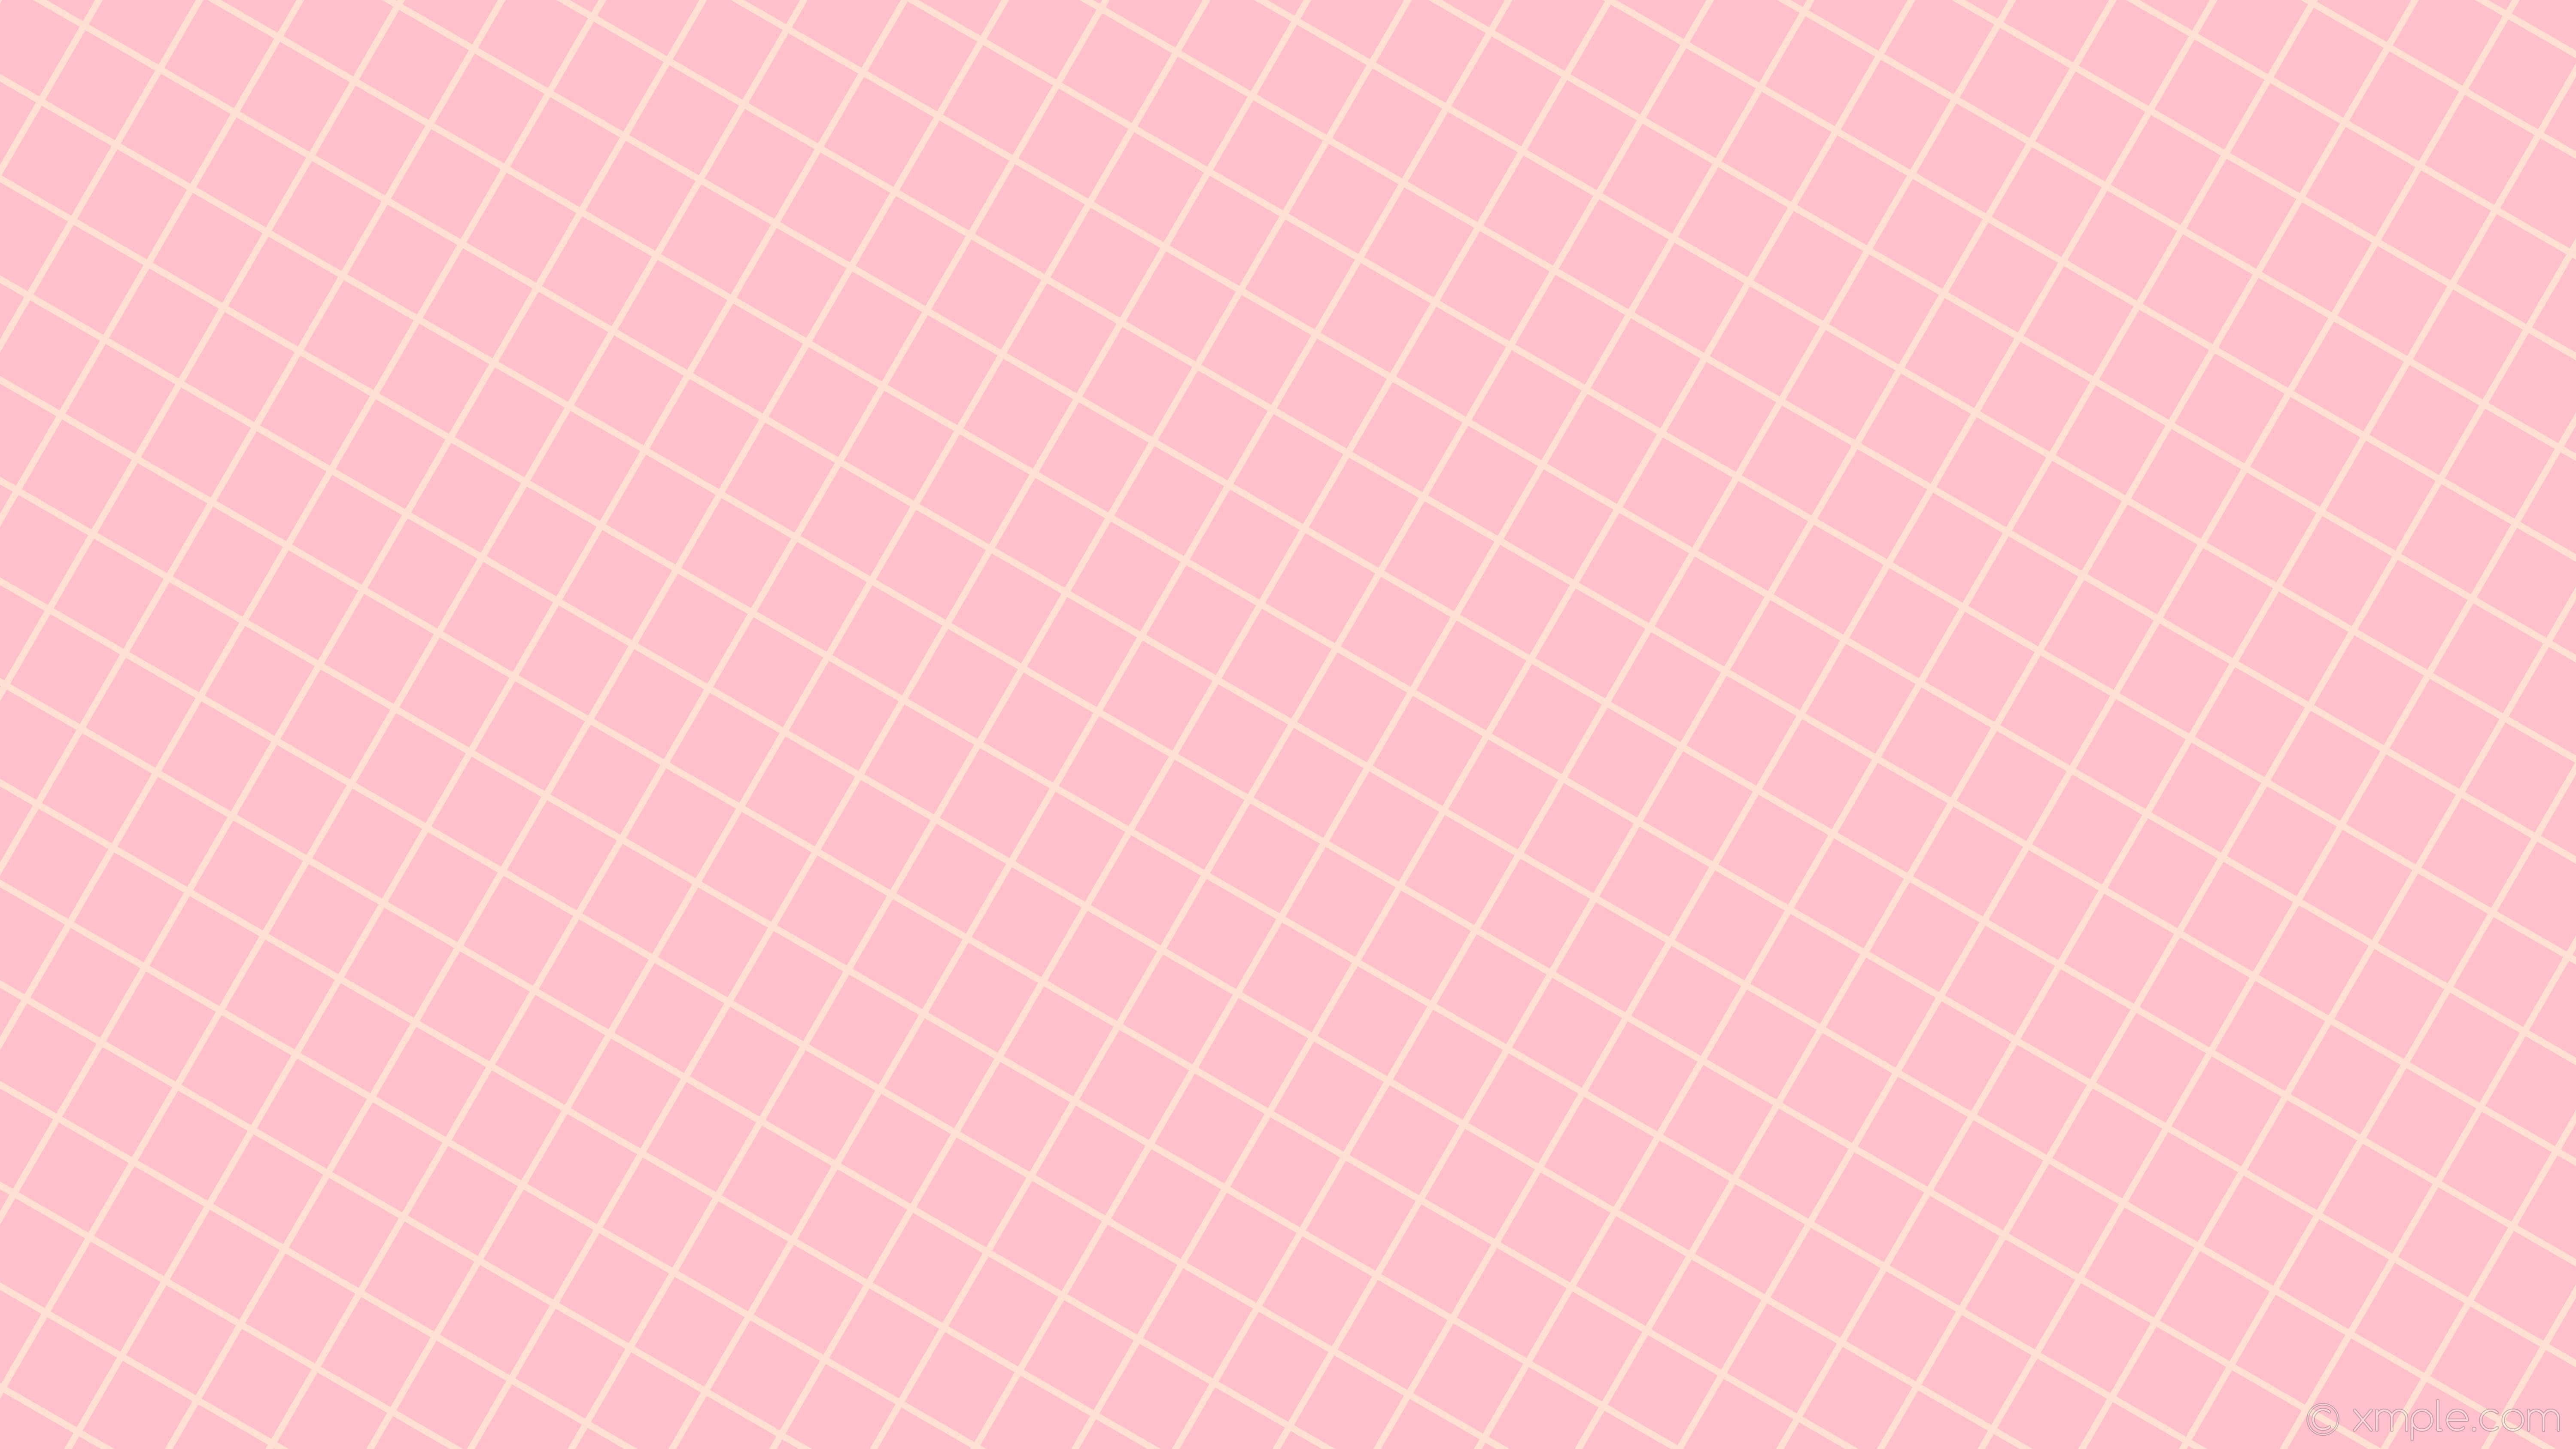 Enjoy the calming pastel aesthetic of this grid pattern